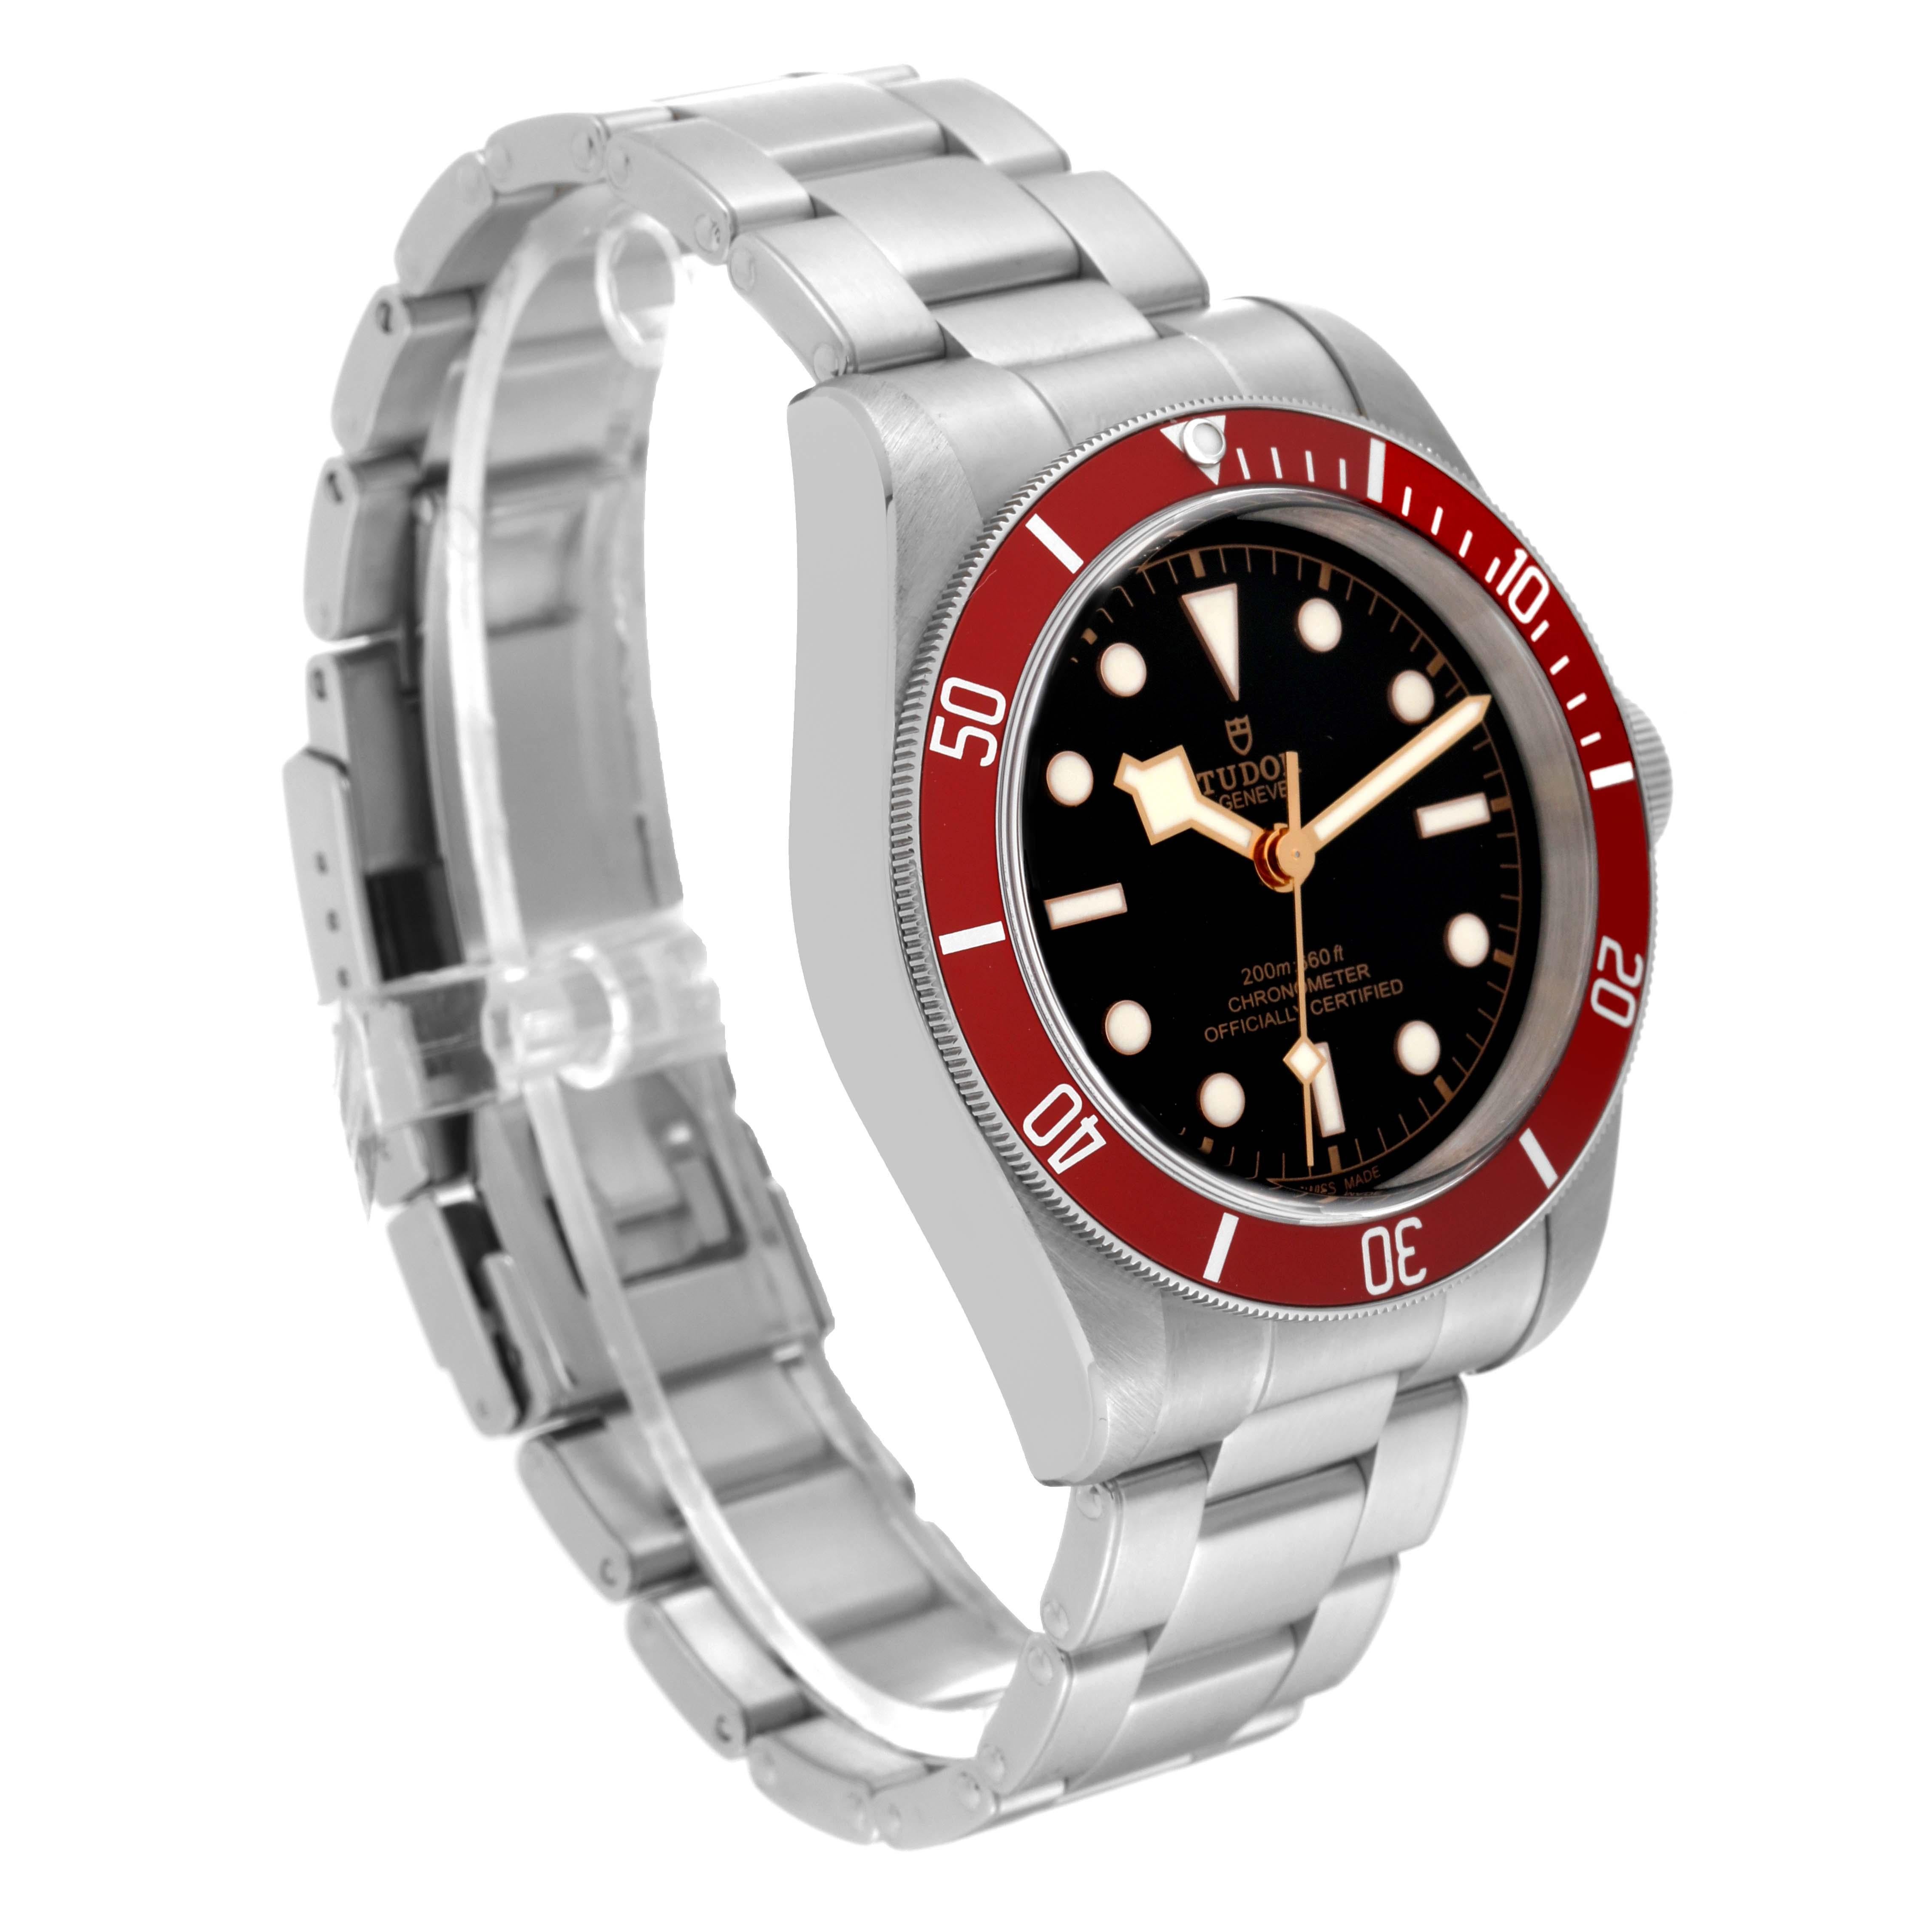 Tudor Heritage Black Bay Burgundy Bezel Steel Mens Watch 79230. Automatic self-winding movement. Stainless steel oyster case 41.0 mm in diameter. Tudor rose logo on a crown. Stainless steel unidirectional rotatable bezel with matte burgundy anodized